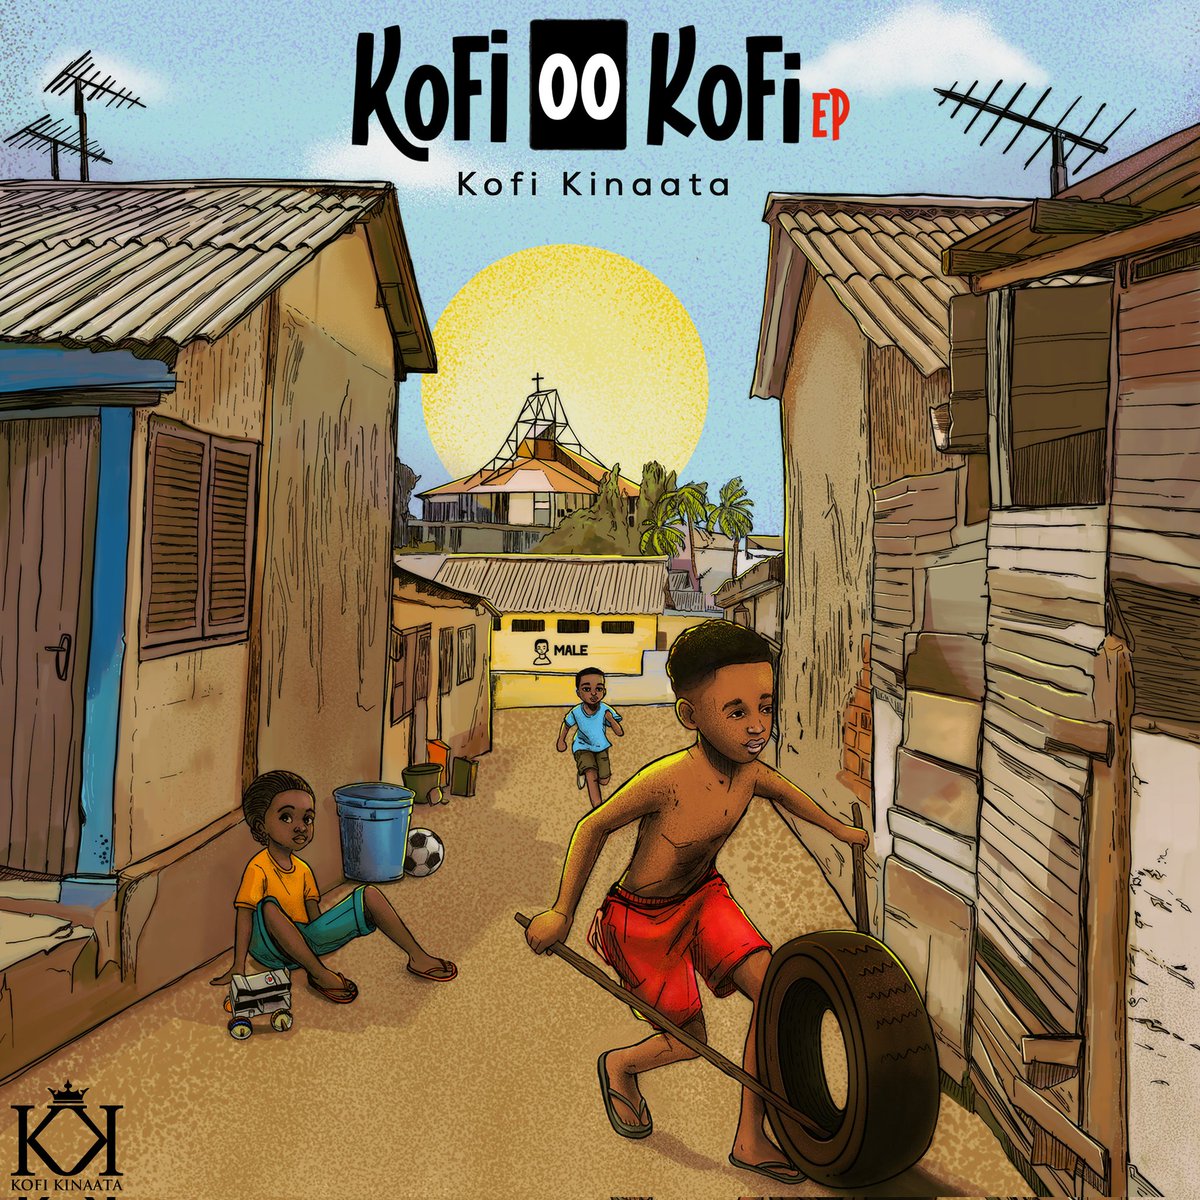 I've never been this happy sharing a musical artwork. The long awaited EP of the decade is abt to drop... Give it all the support u can #KofiooKofi
#TeamMove